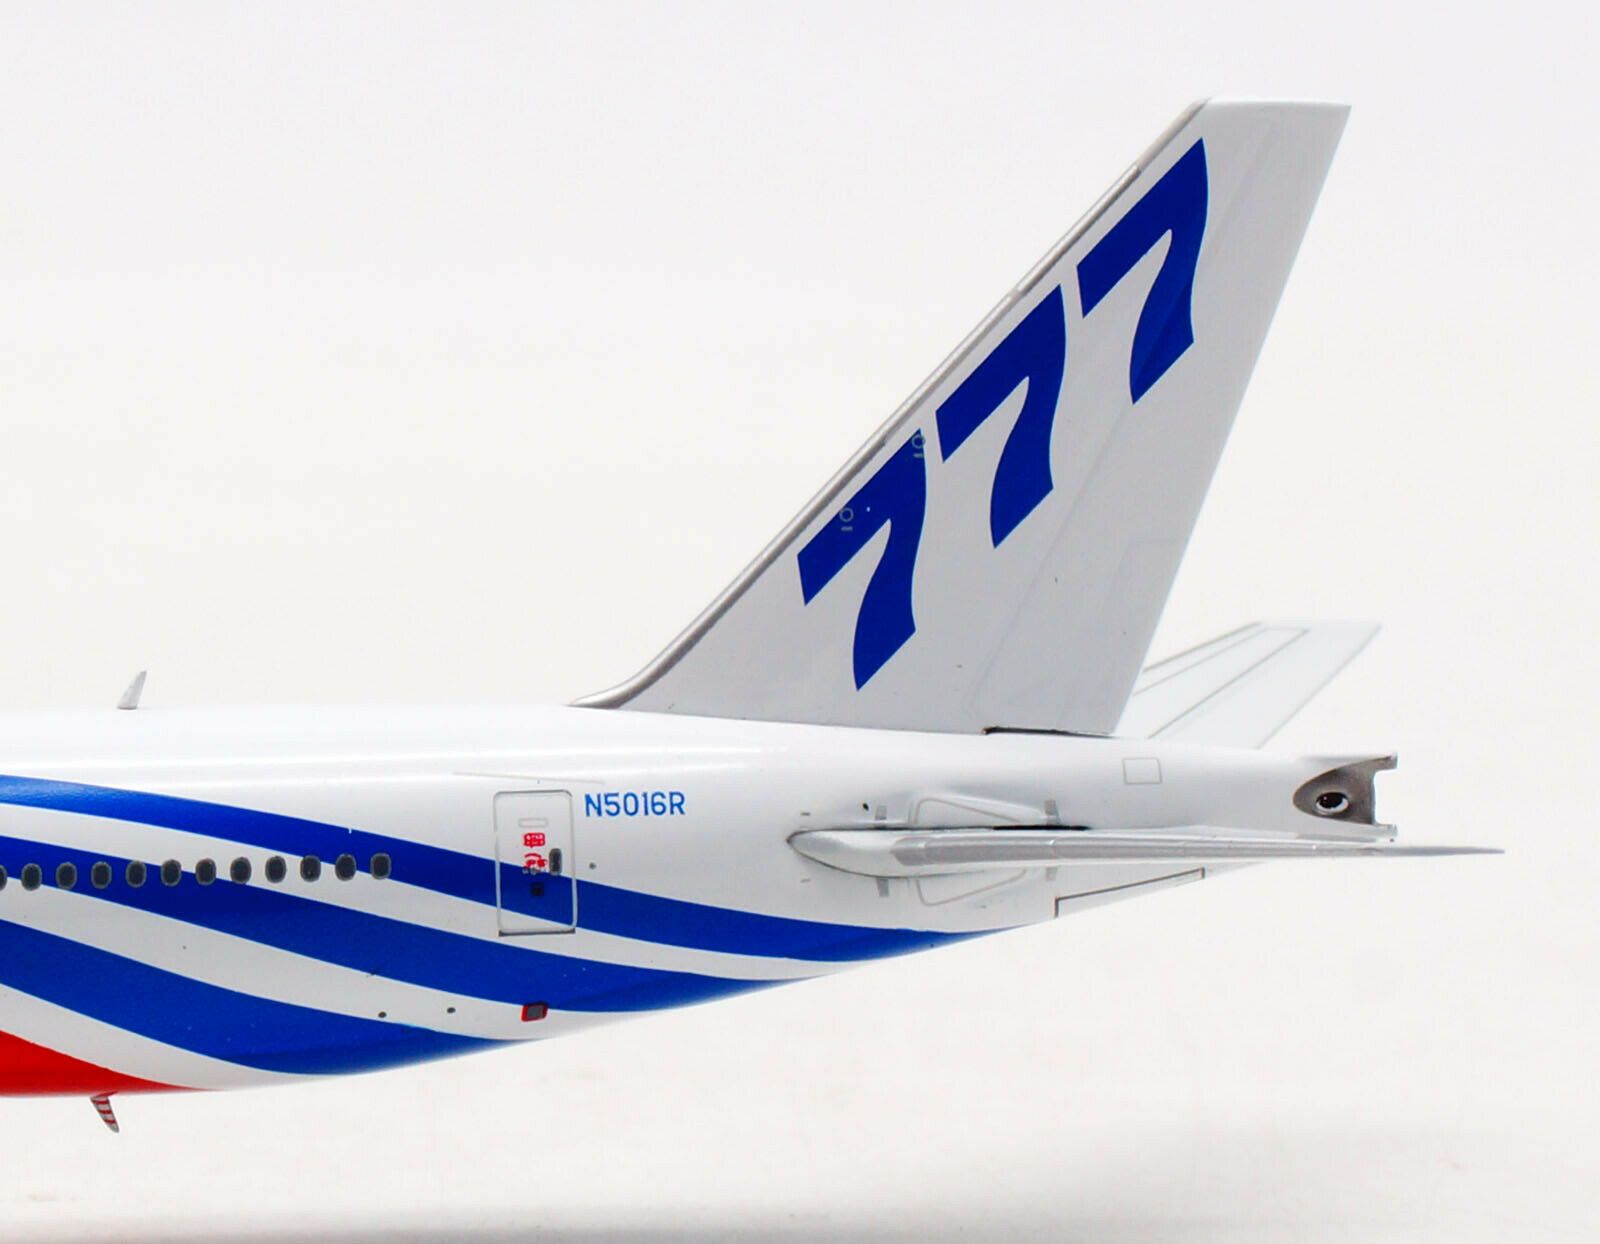 1/400 Boeing Aircraft Company "House Colors" B 777-300ER Aviation400 AV4091 (Includes free stand) - Midwest Model Store